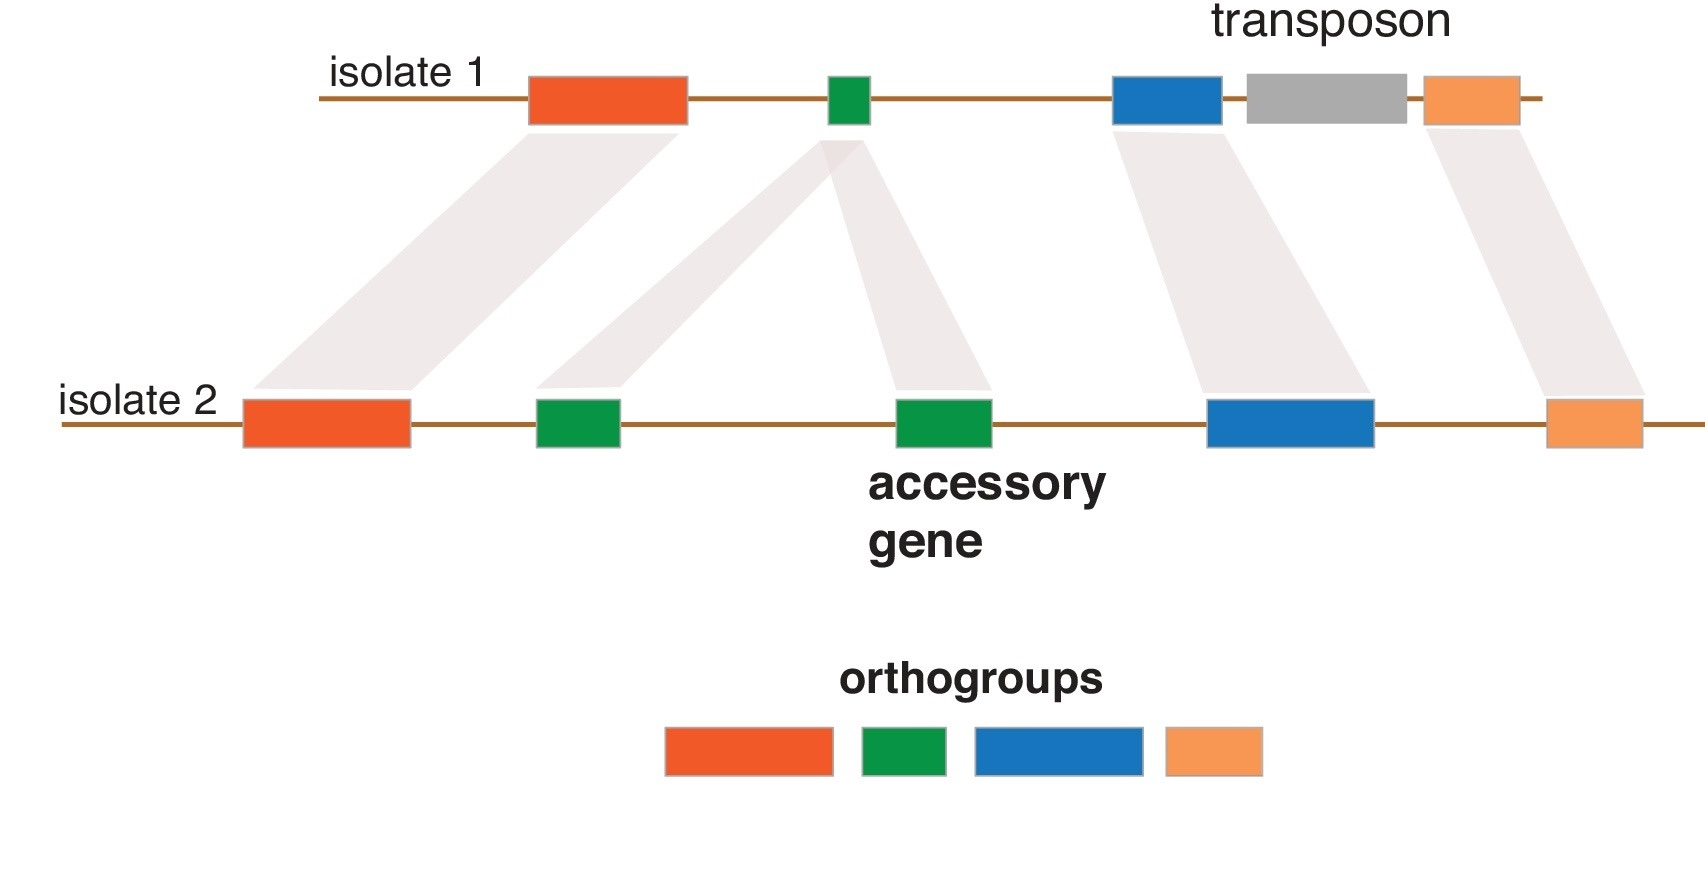 The evolution of genome architecture and pangenomes